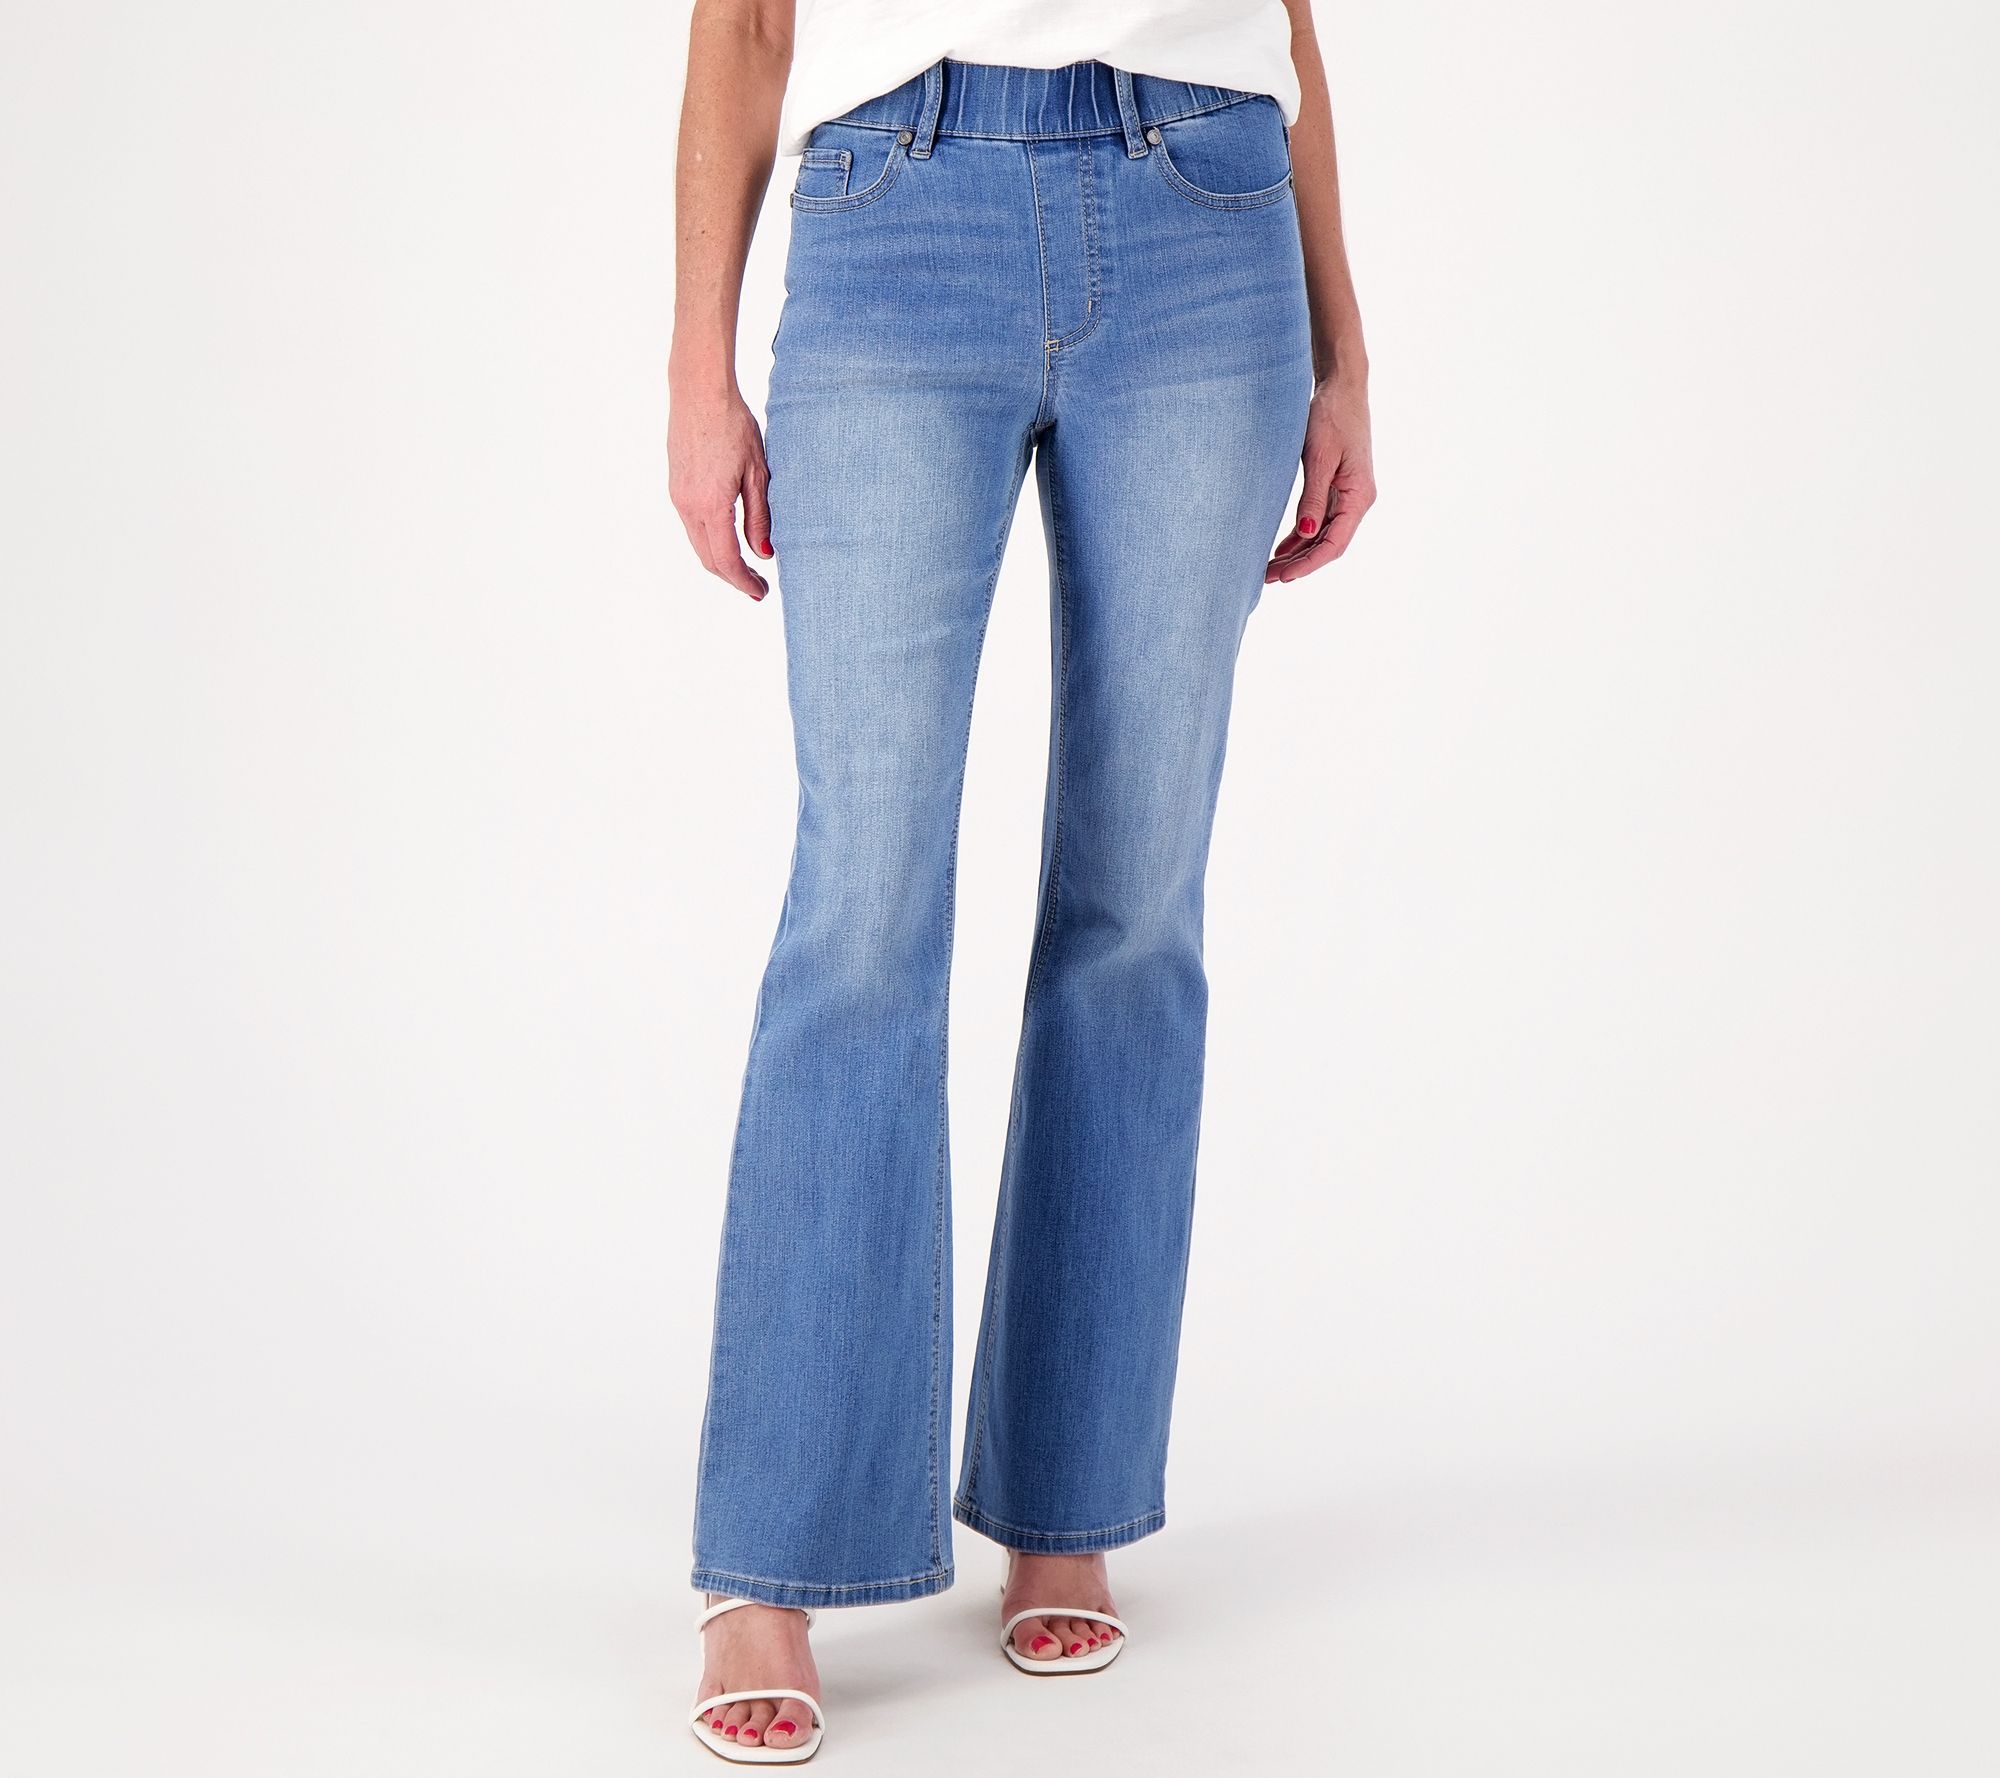 Women's Bargain Bells High Rise Stretch Light Wash Pull-On Flare Jeans